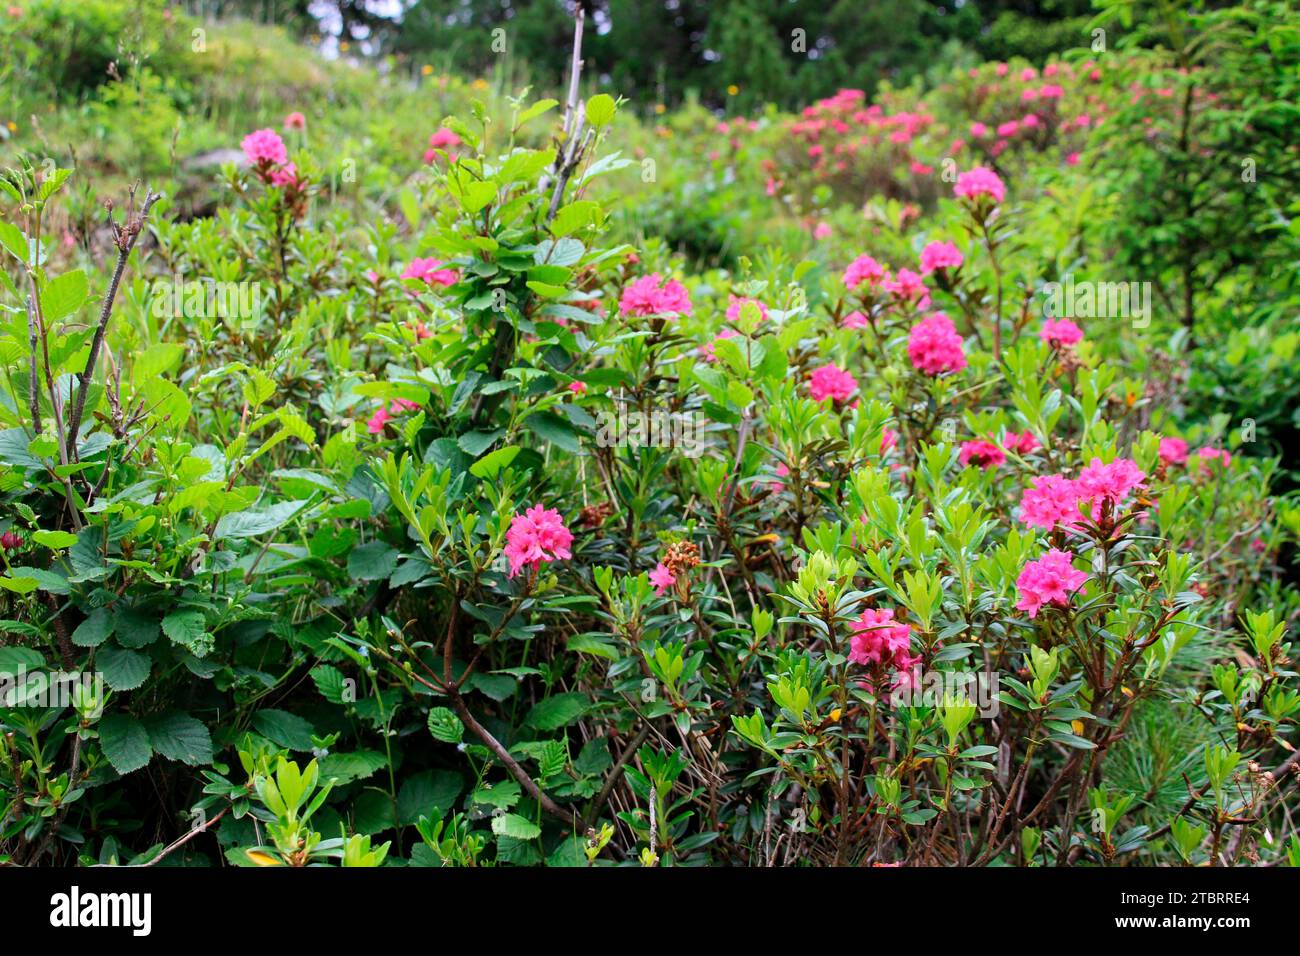 Alpine roses, Alpine rose bush (Rhododendron ferrugineum) at the edge of the path on a hike to the Außermelang-Alm in the Wattener Lizum, Wattens, Walchen, Tyrol, Austria, Europe Stock Photo